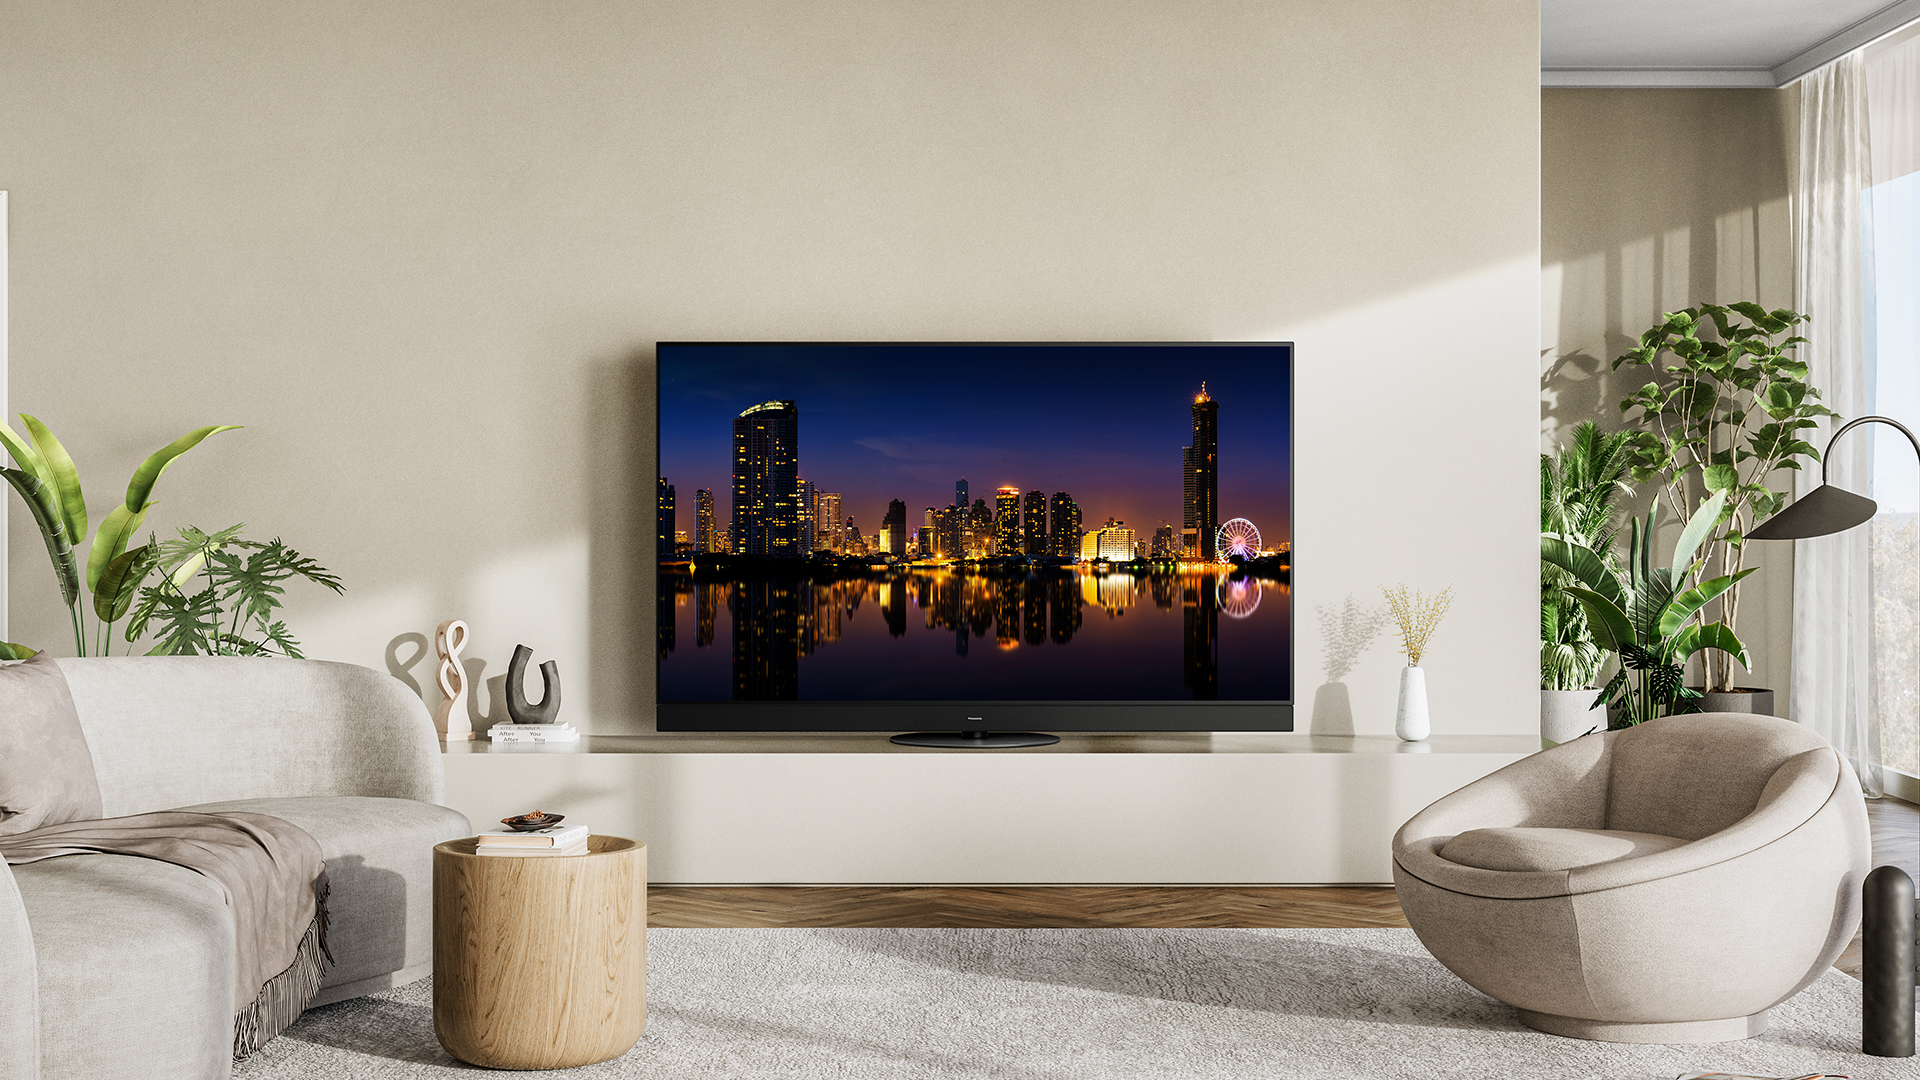 Panasonic's new 2024 OLED TVs are the world's first with  Fire TV  built-in